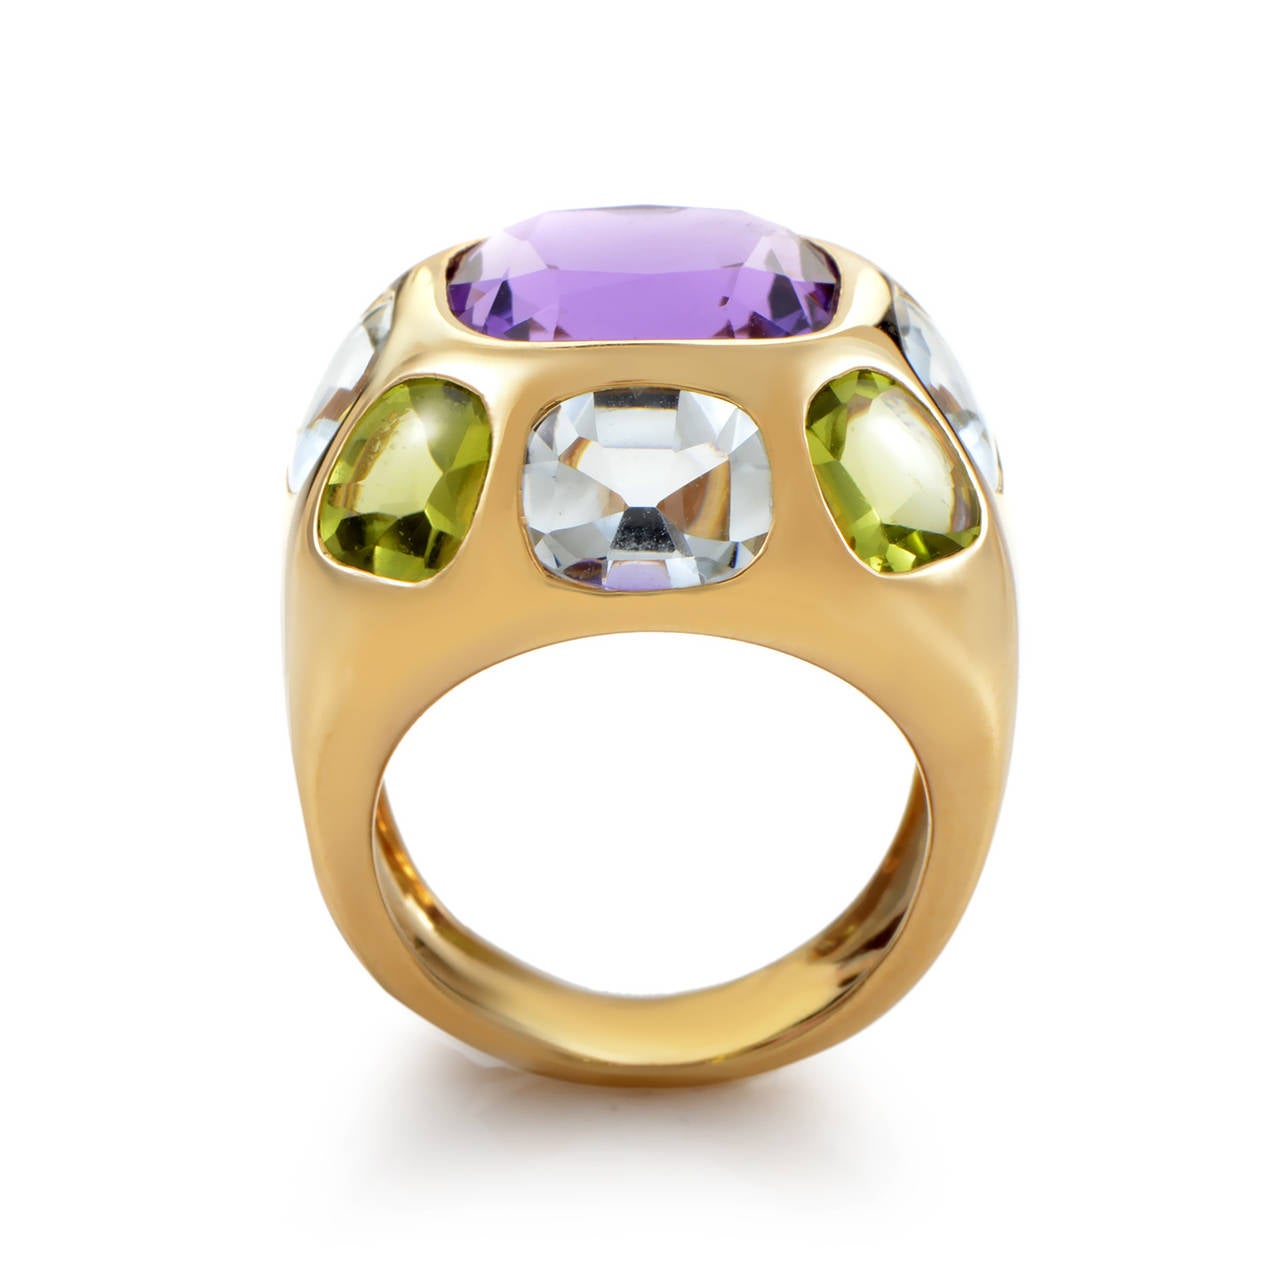 Flawlessly forged 18K yellow gold presents a worthy platform for multiple stones. Amethyst, aquamarine, and peridot make bold statements at the crest of this ring's smooth taper.

Included Items: Manufacturer's Box
Ring Size: 5.5